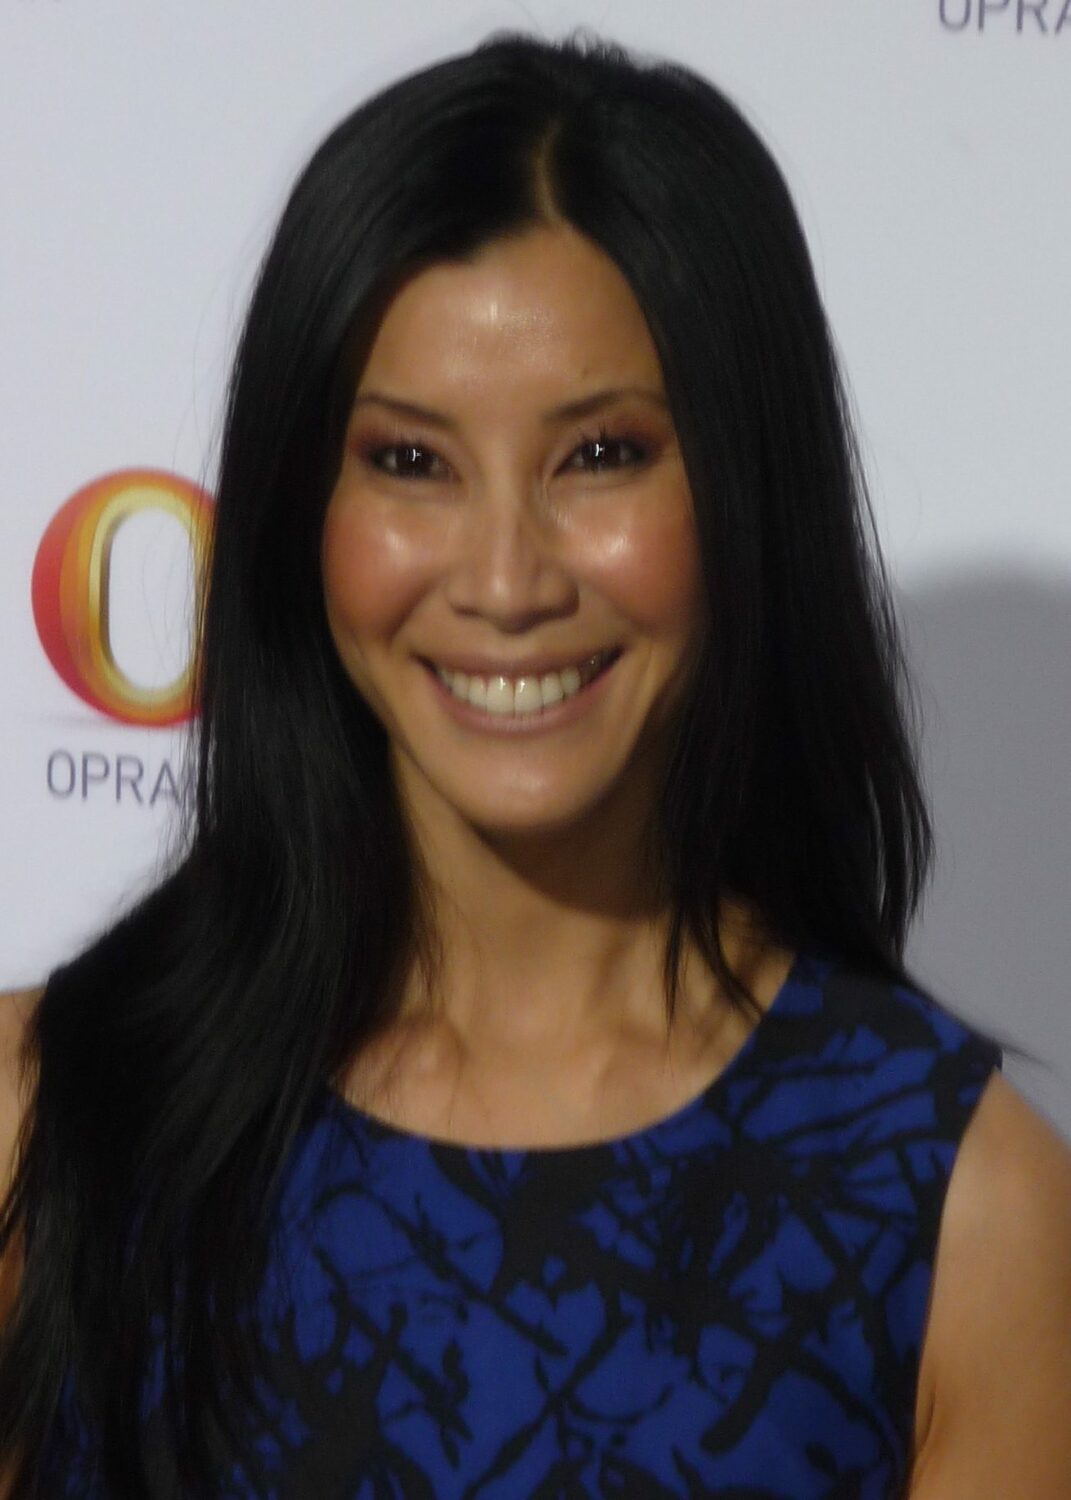 Lisa Ling in 2011. By Greg Hernandez from California, CA, USA - Lisa Ling at 2011 TCA, CC BY 2.0, https://commons.wikimedia.org/w/index.php?curid=94479525